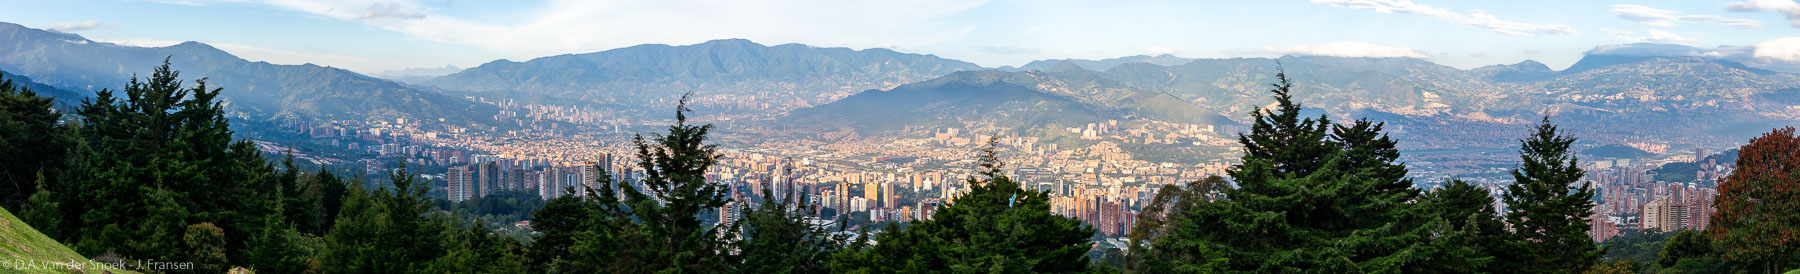 Colombia-1441-Pano.jpg